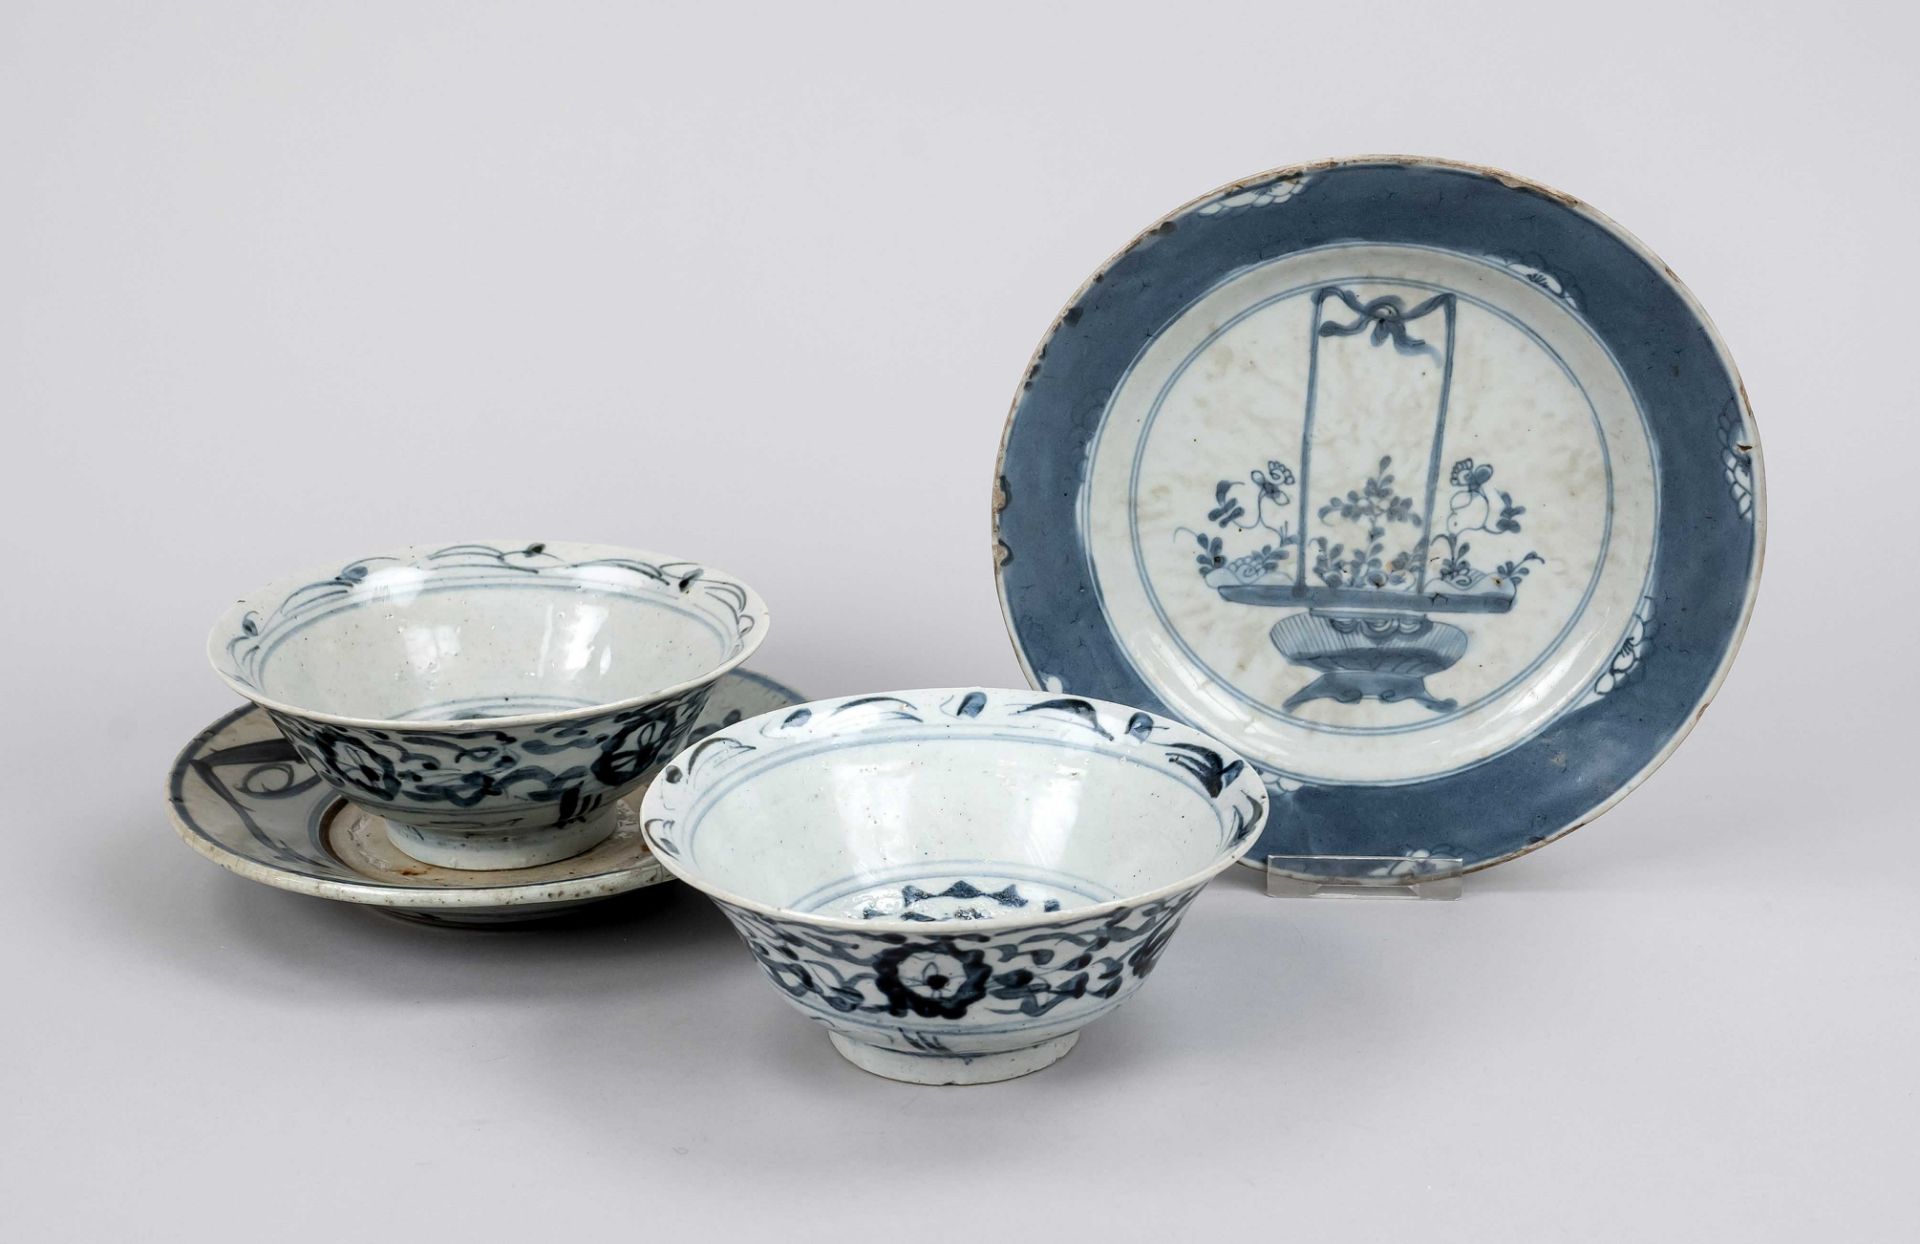 2 plates and 2 bowls, China, 17th/18th c., porcelain with cobalt blue glaze decoration of a flower